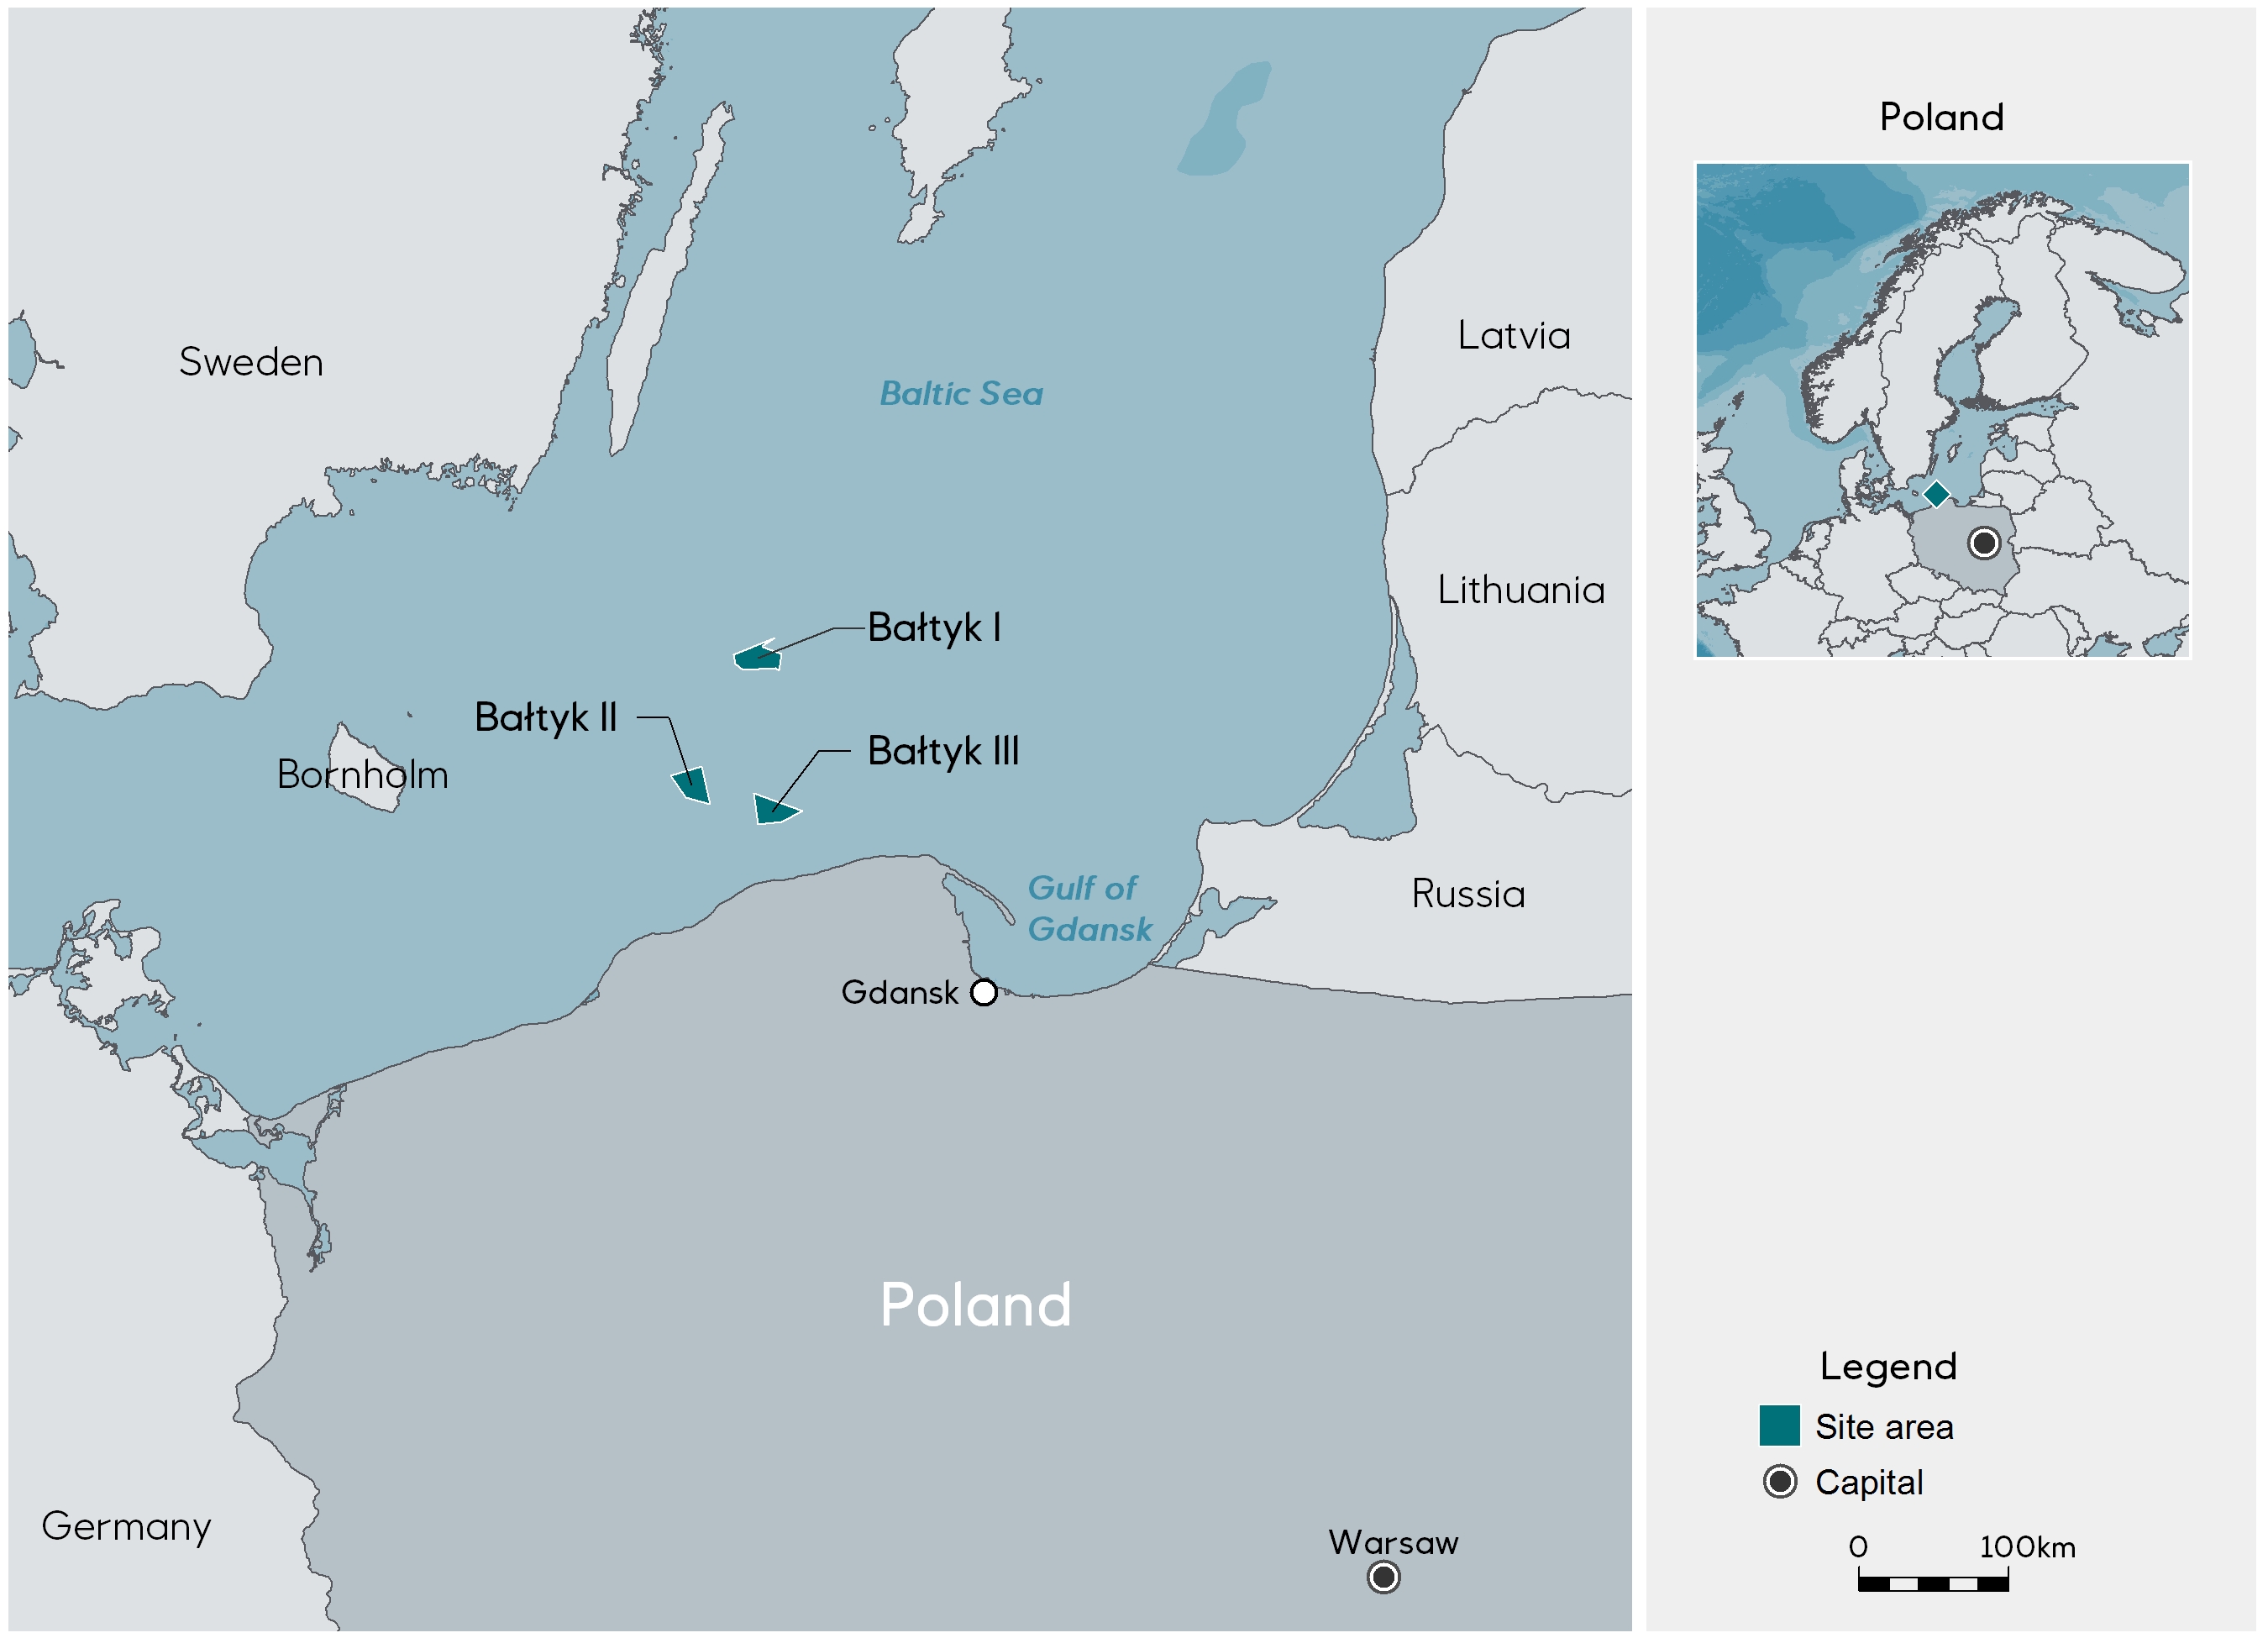 Equinor and Polenergia Start Gauging Polish Offshore Wind Supply Chain Potential